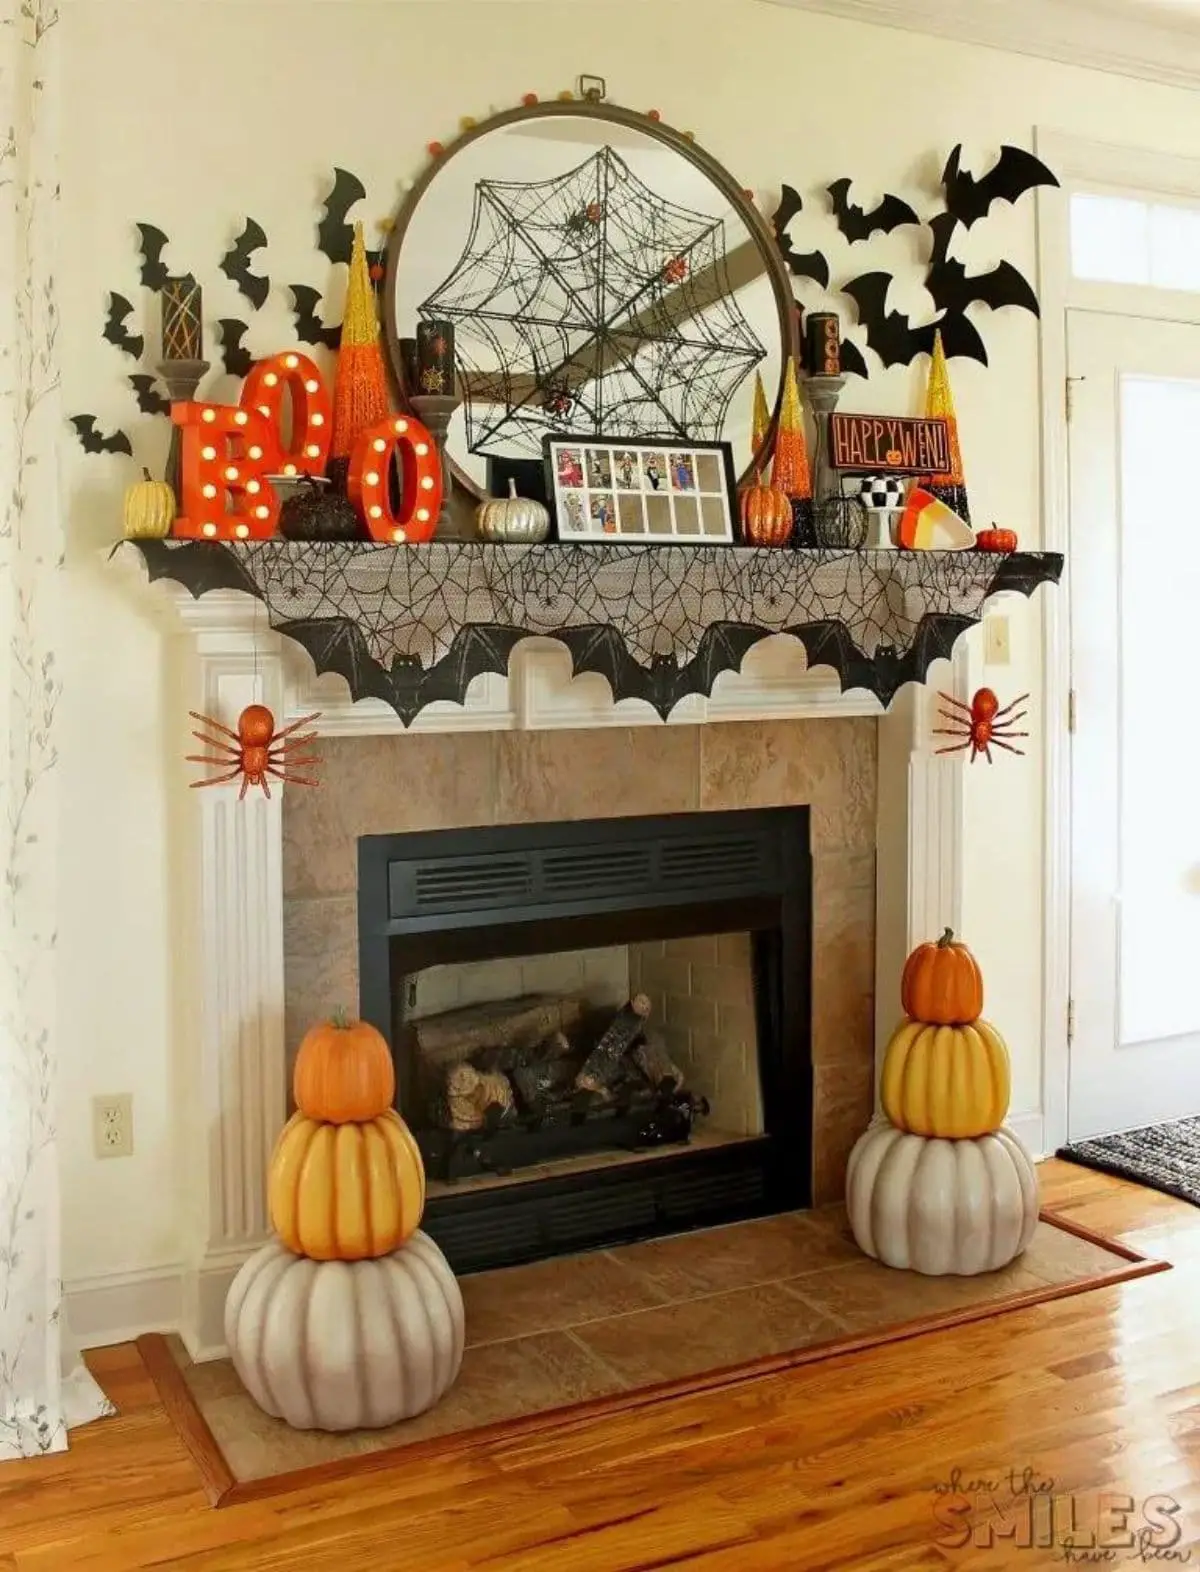 mantel with colorful pumpkins, BOO letters, bats, and spiderweb